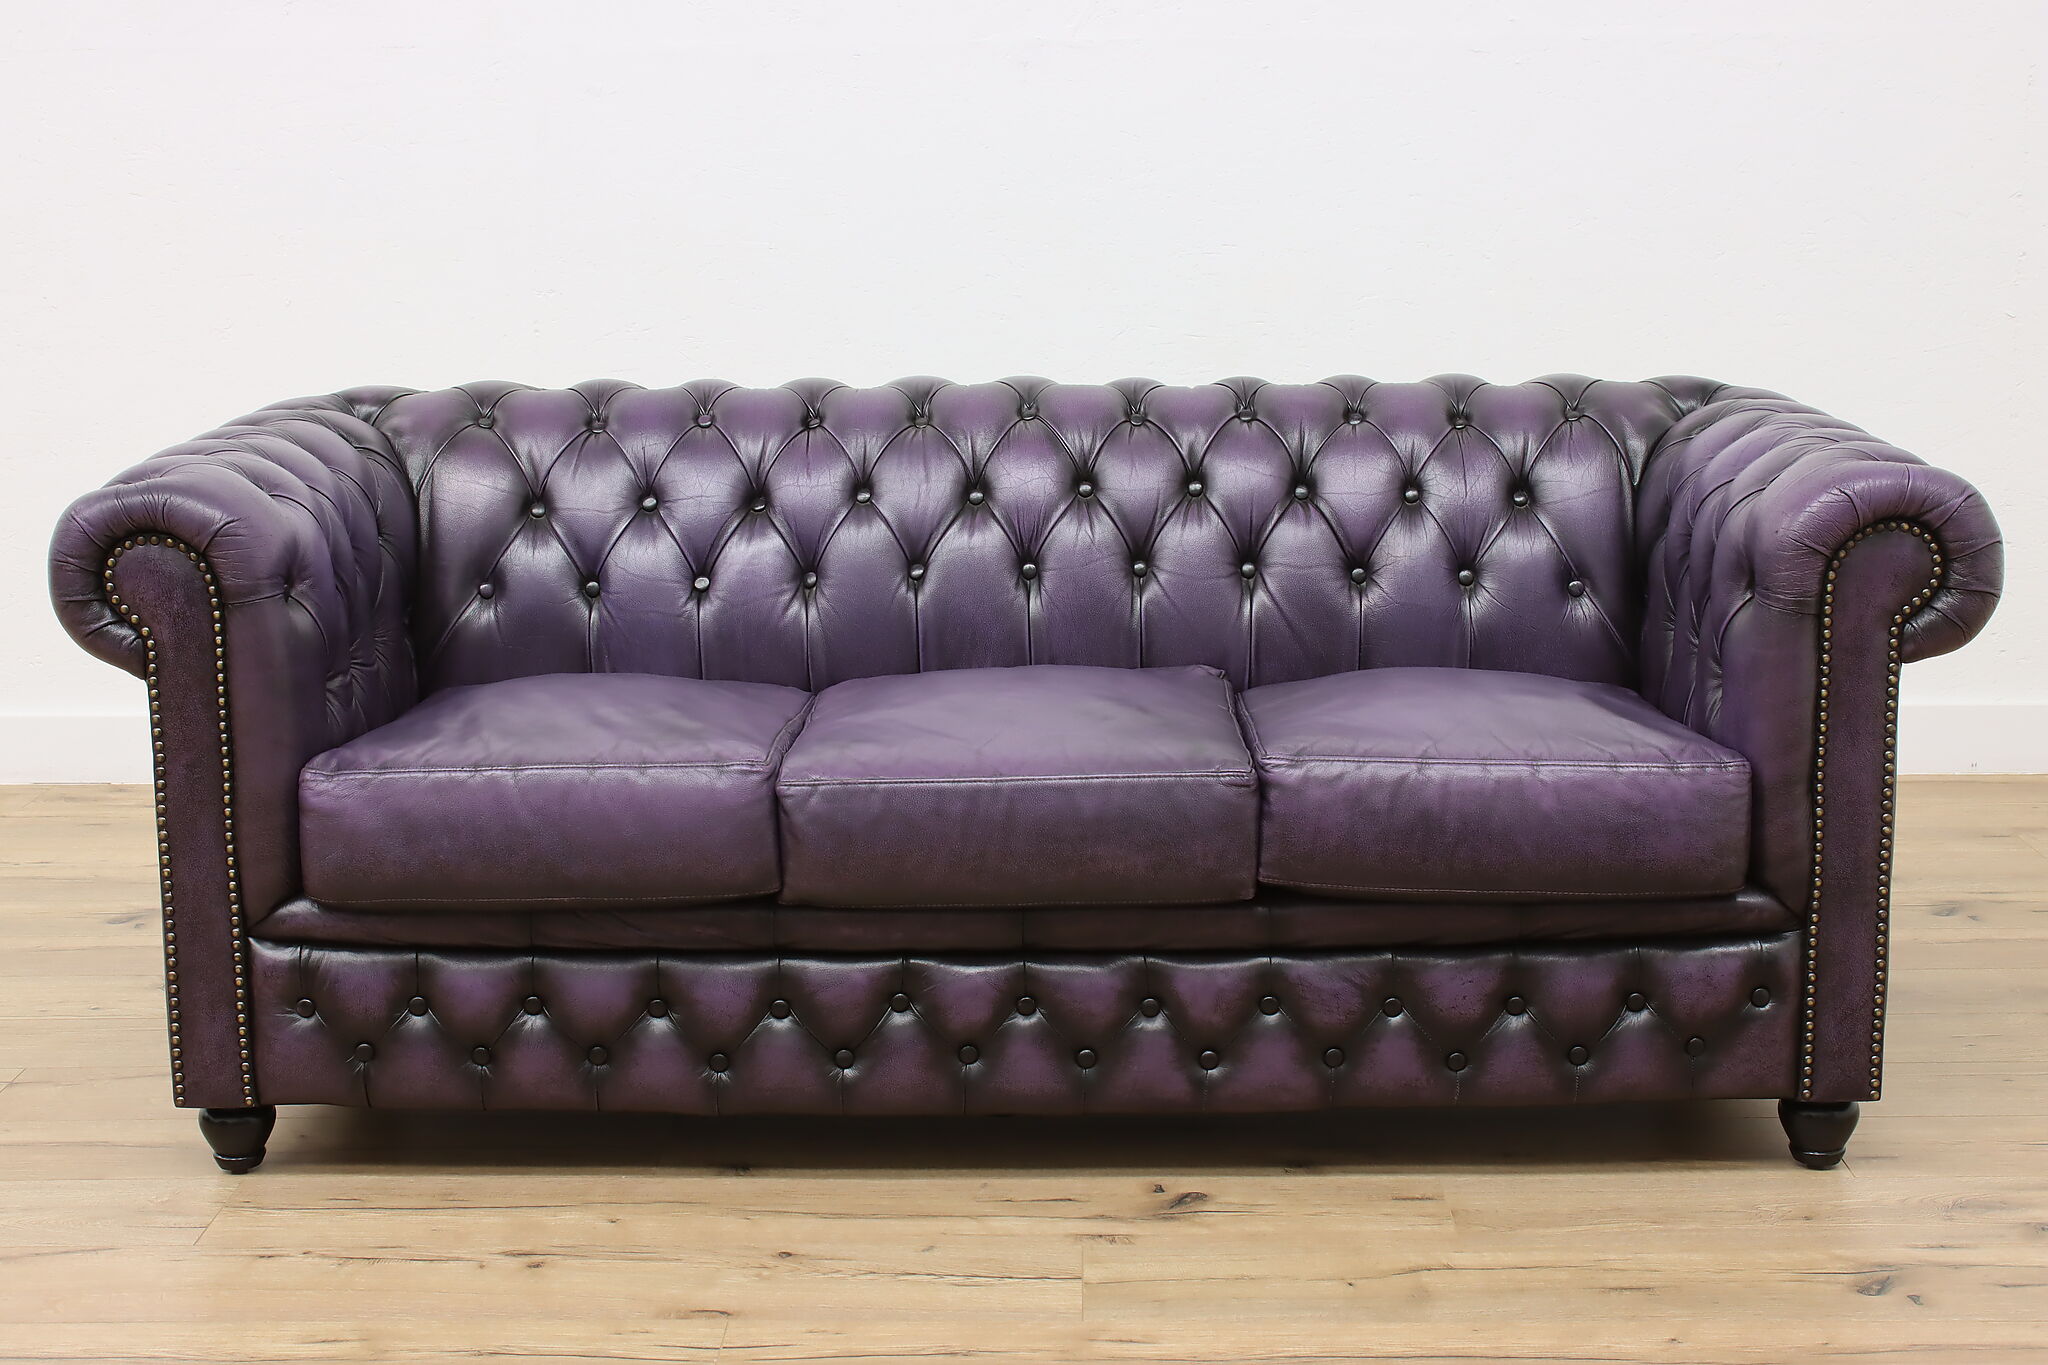 Chesterfield Tufted Purple Leather